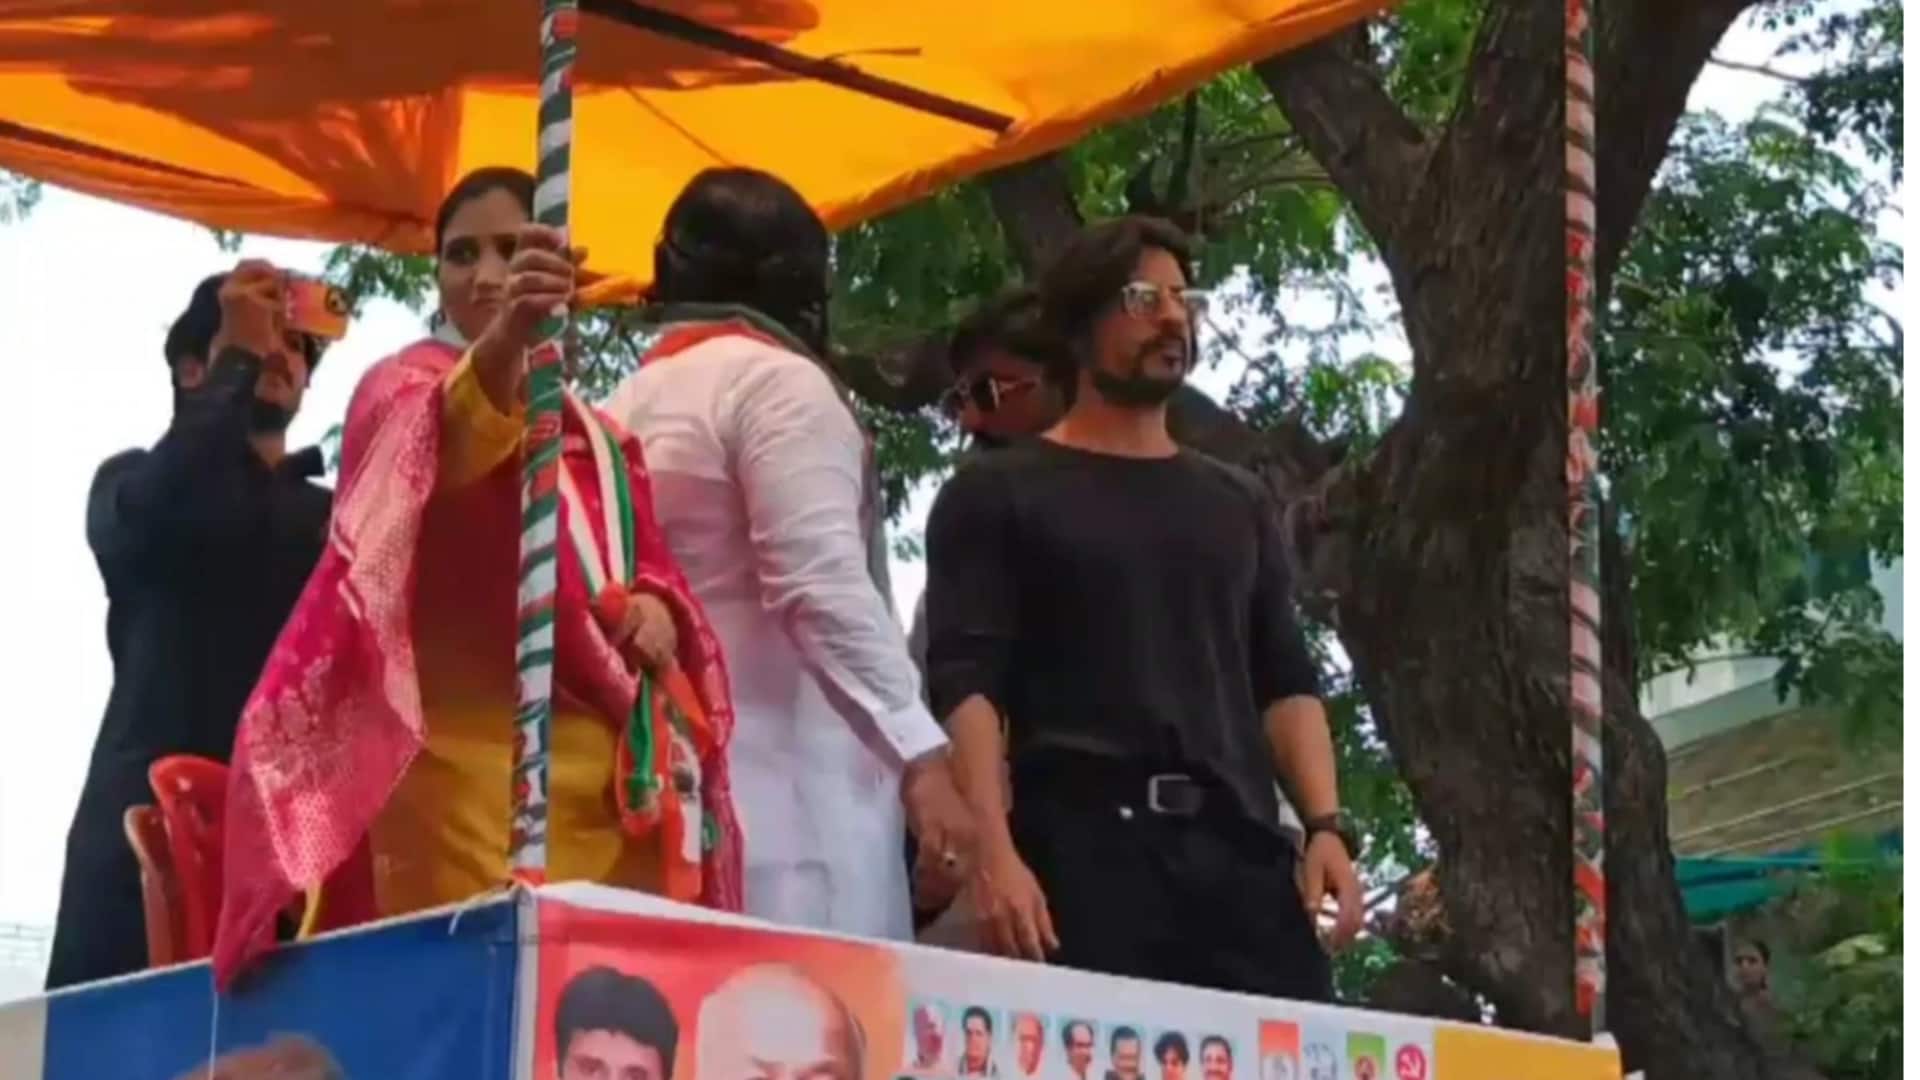 Shah Rukh-lookalike campaigns for Congress candidate, BJP calls it 'scam' 